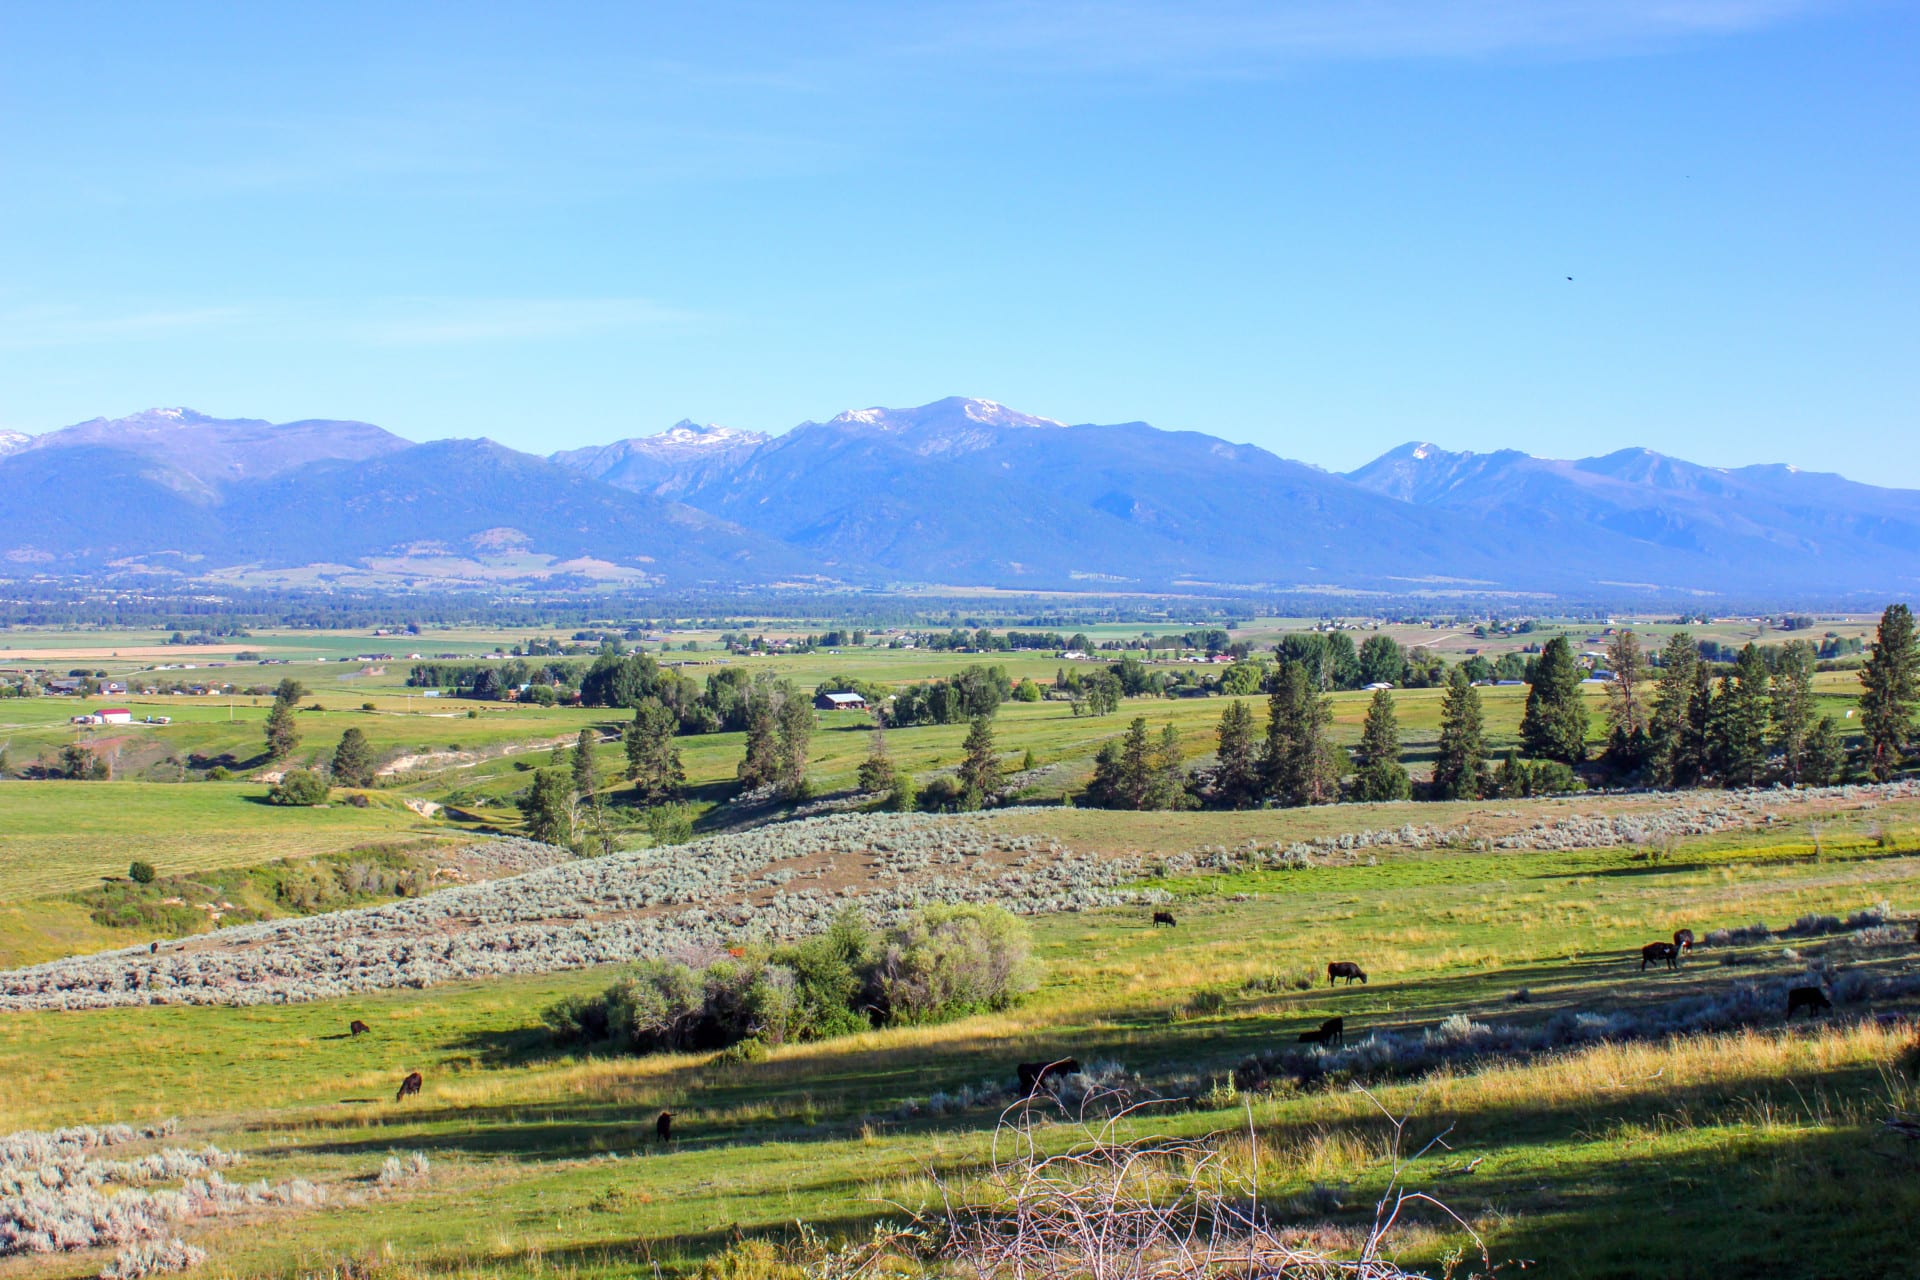 Upper Meadow and cows-Montana Swanson's Apple Orchard